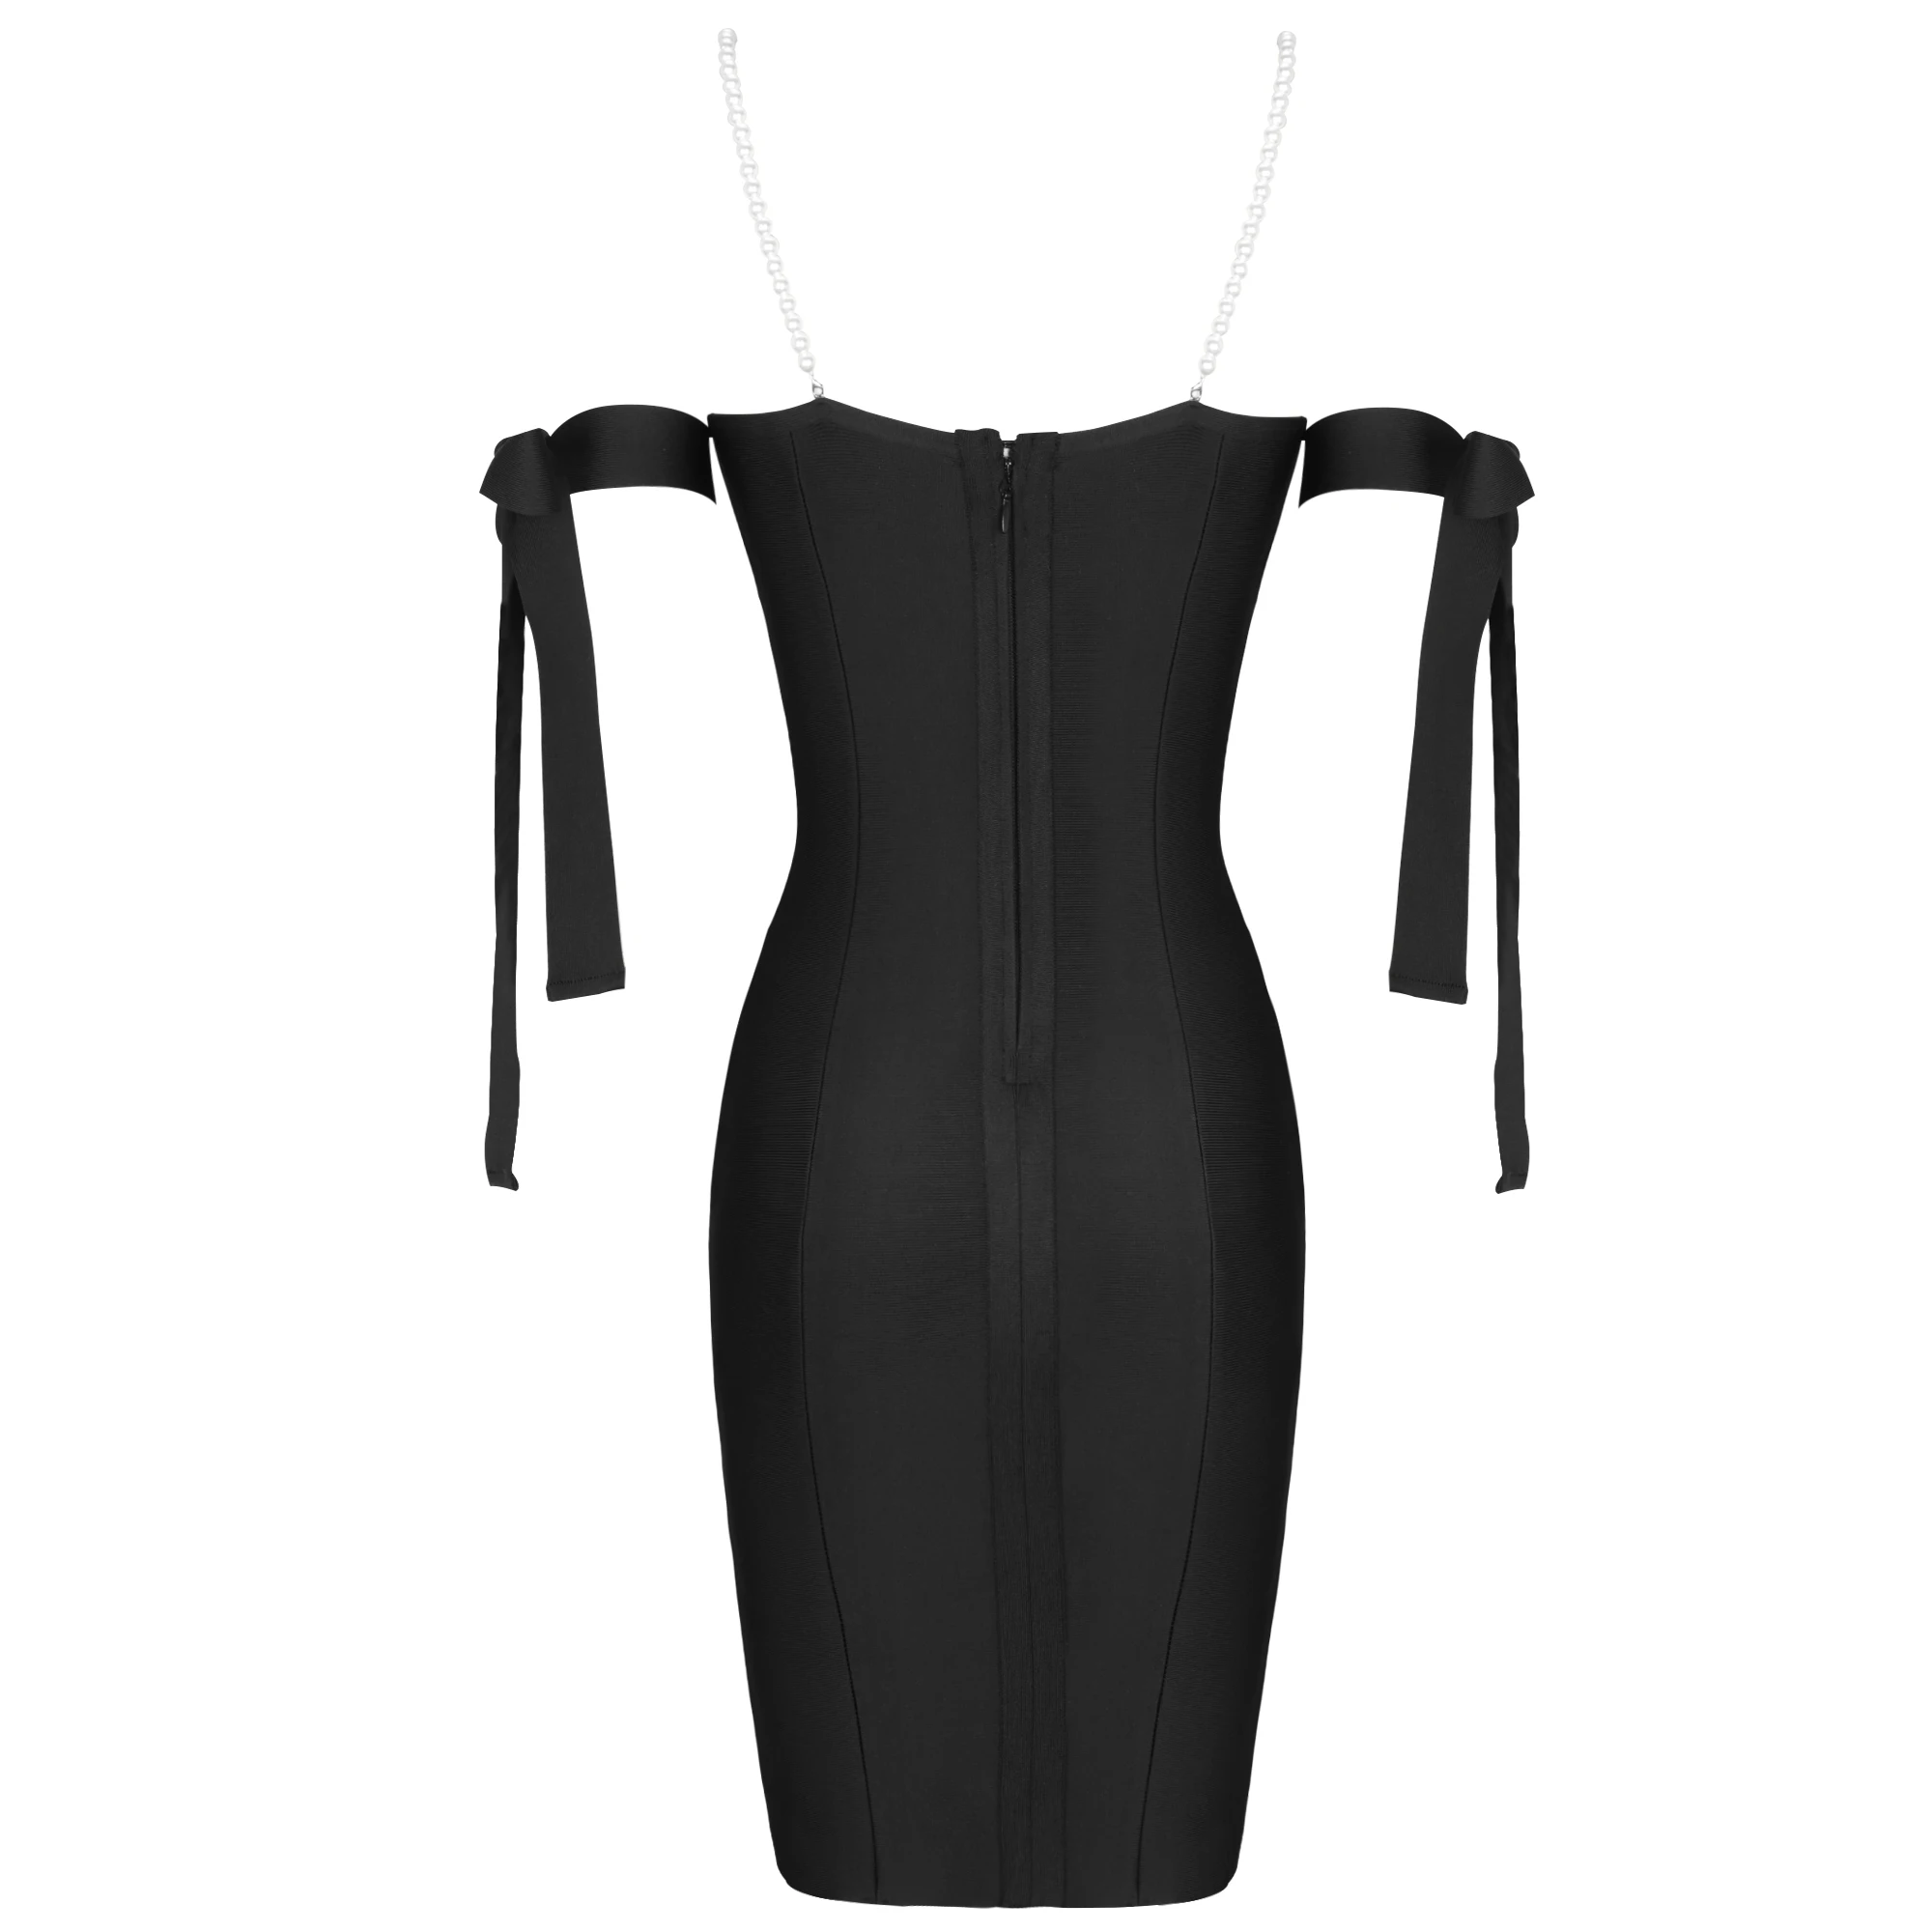 Bandage Dress summer women's 2021 Black Bodycon Dress Ladies purple white red Off Shoulder Sexy Club Party Dress evening Outfits 5